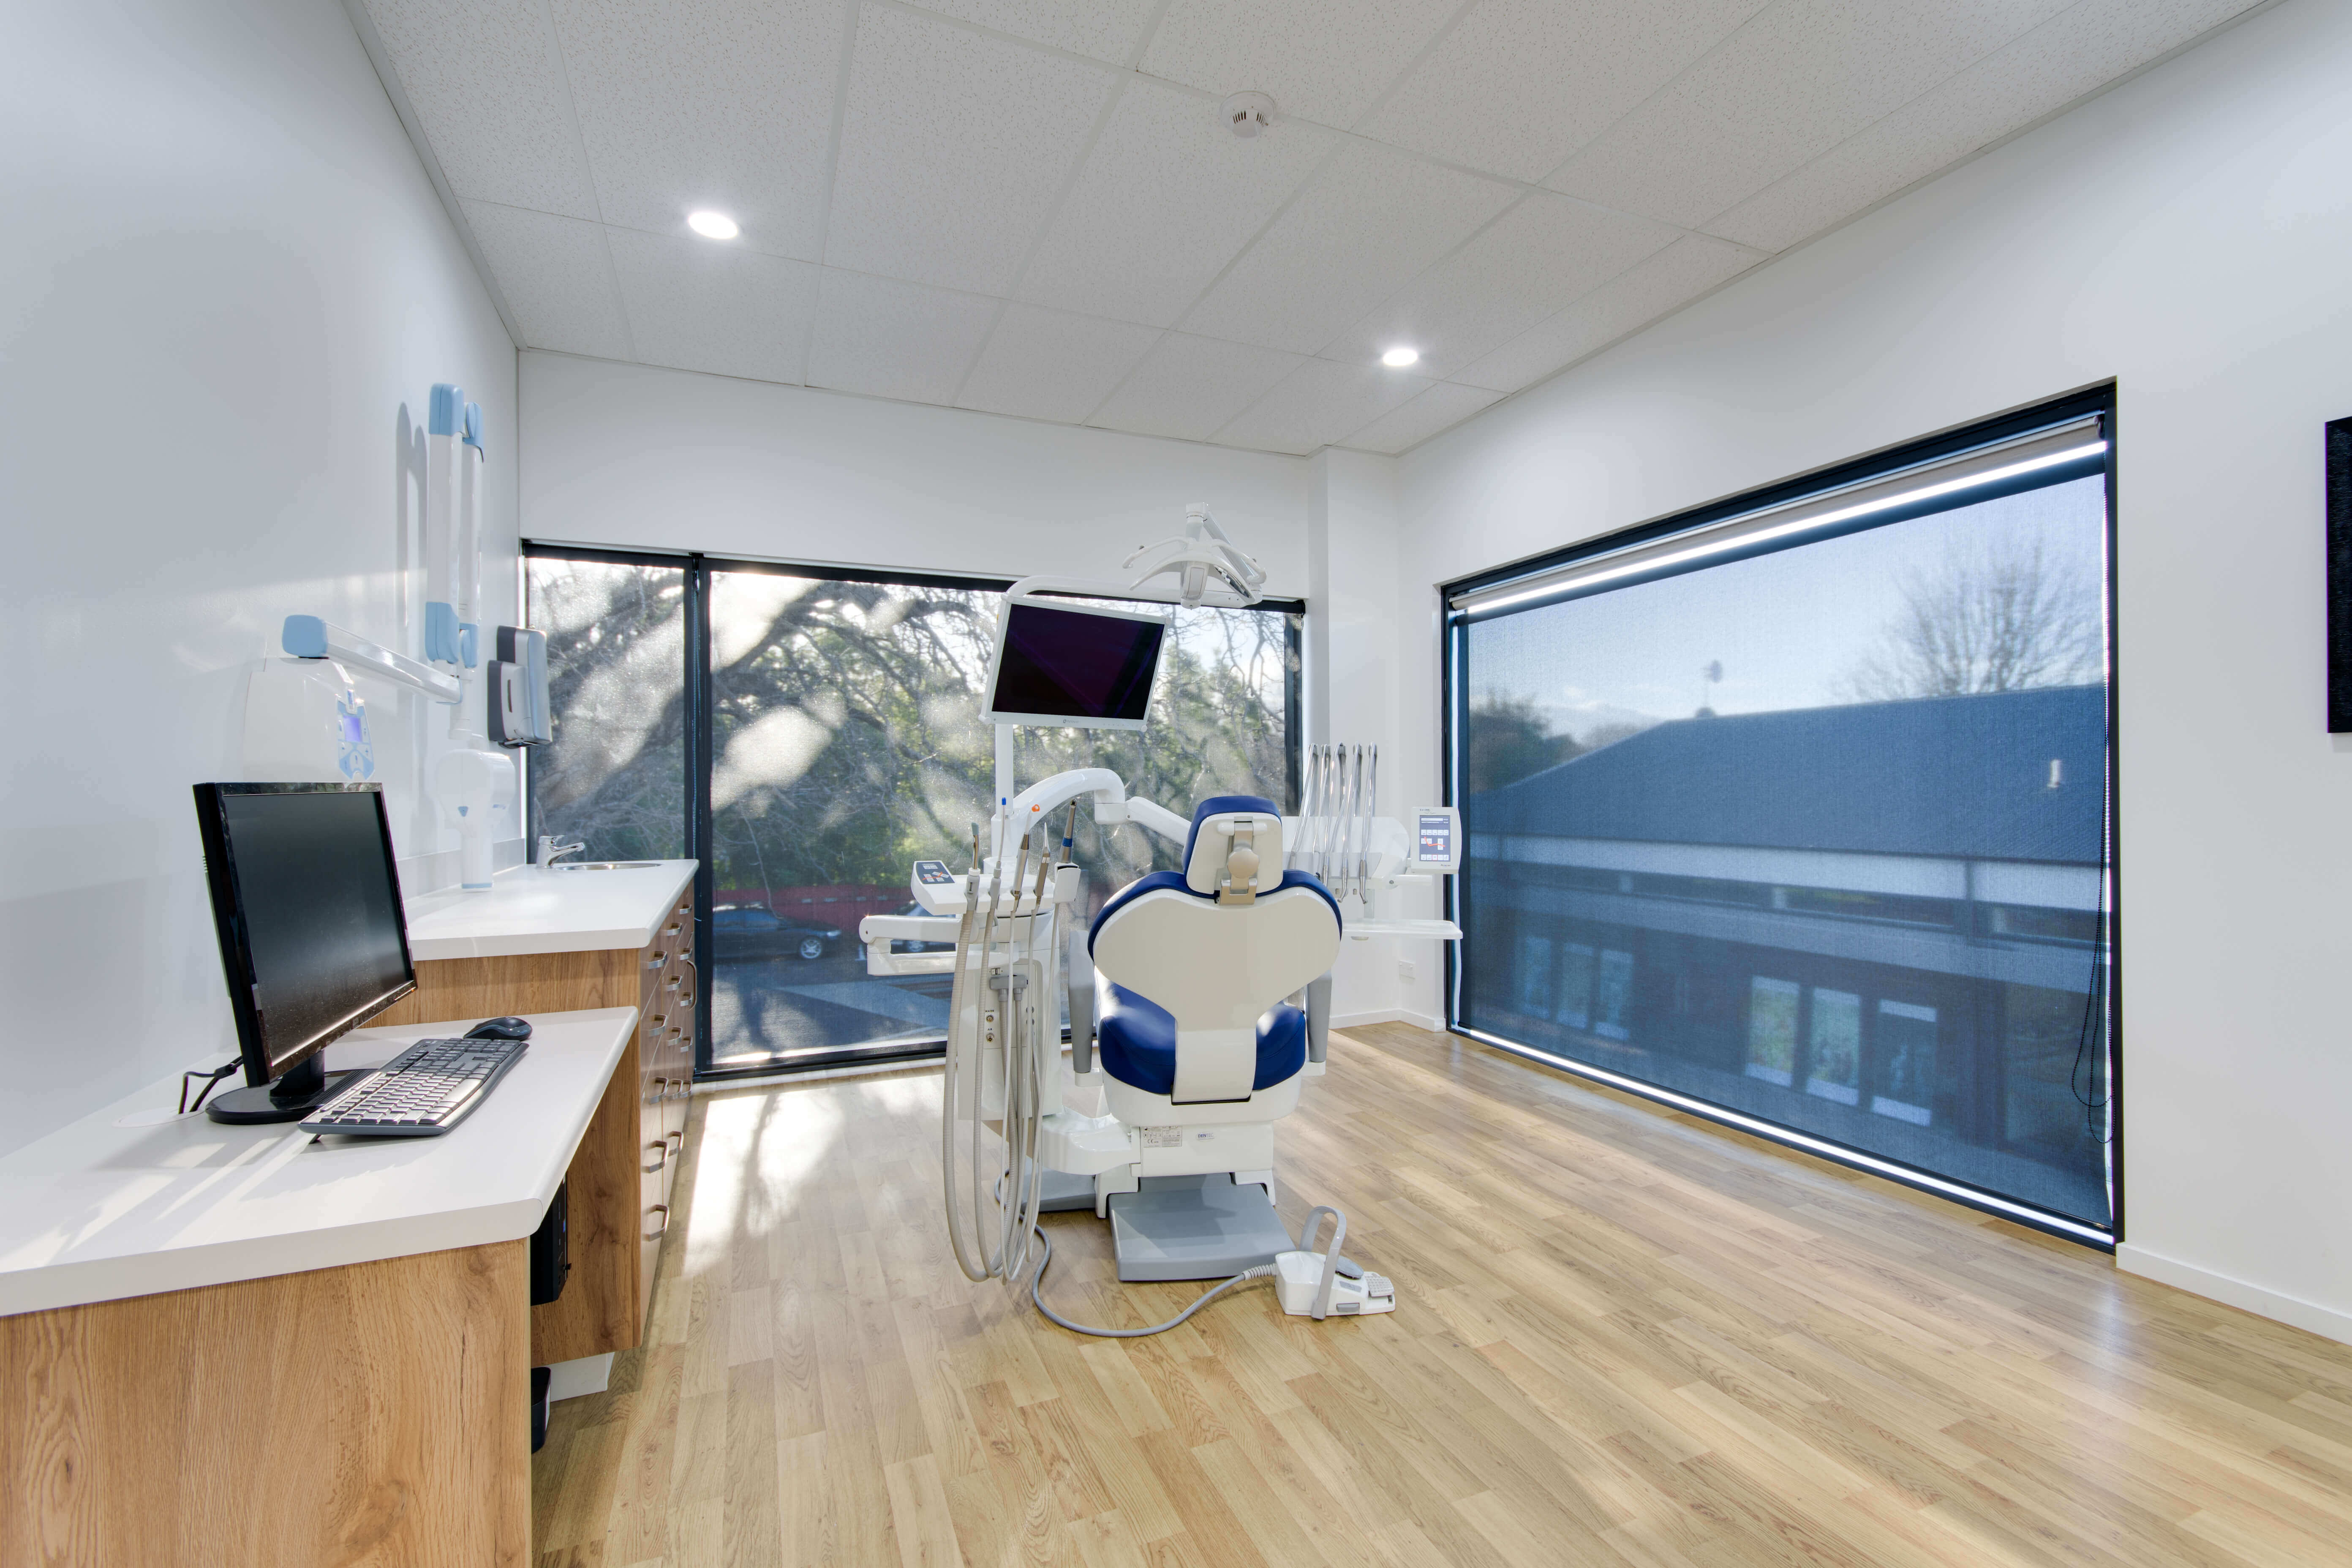 Dental surgery fitout specialists